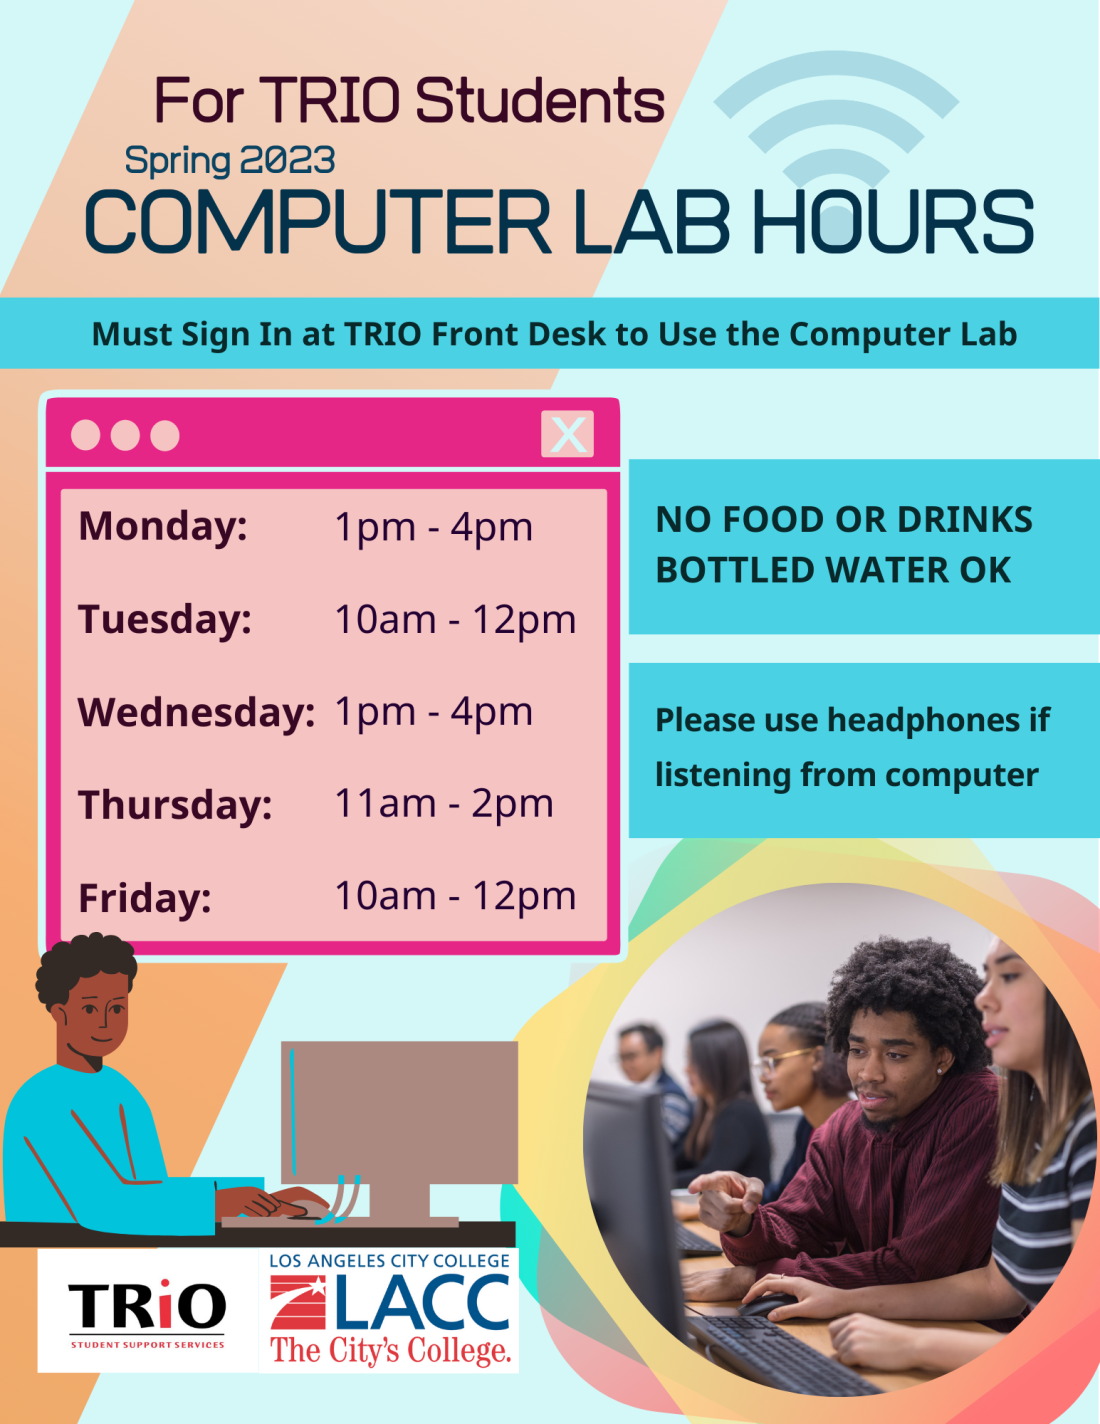 Flyer with information on Computer Lab Hours for Spring 2023 